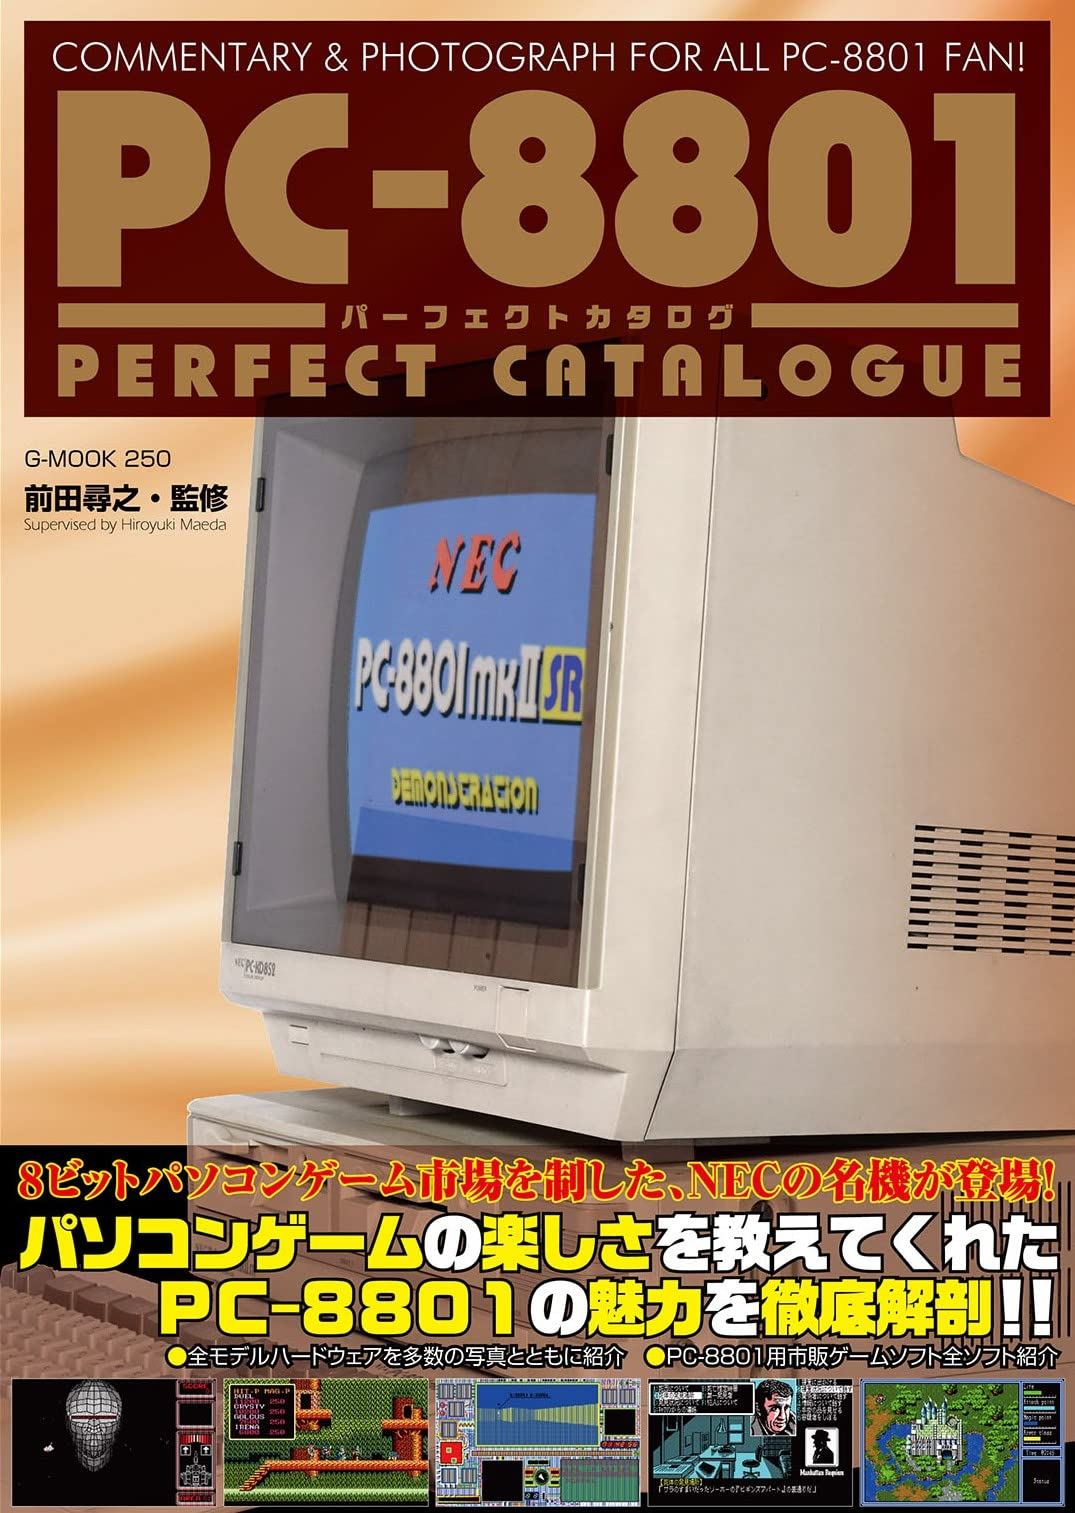 PC-9801パーフェクトカタログ COMMENTARY PHOTOGRAPH FOR ALL PC-9801 